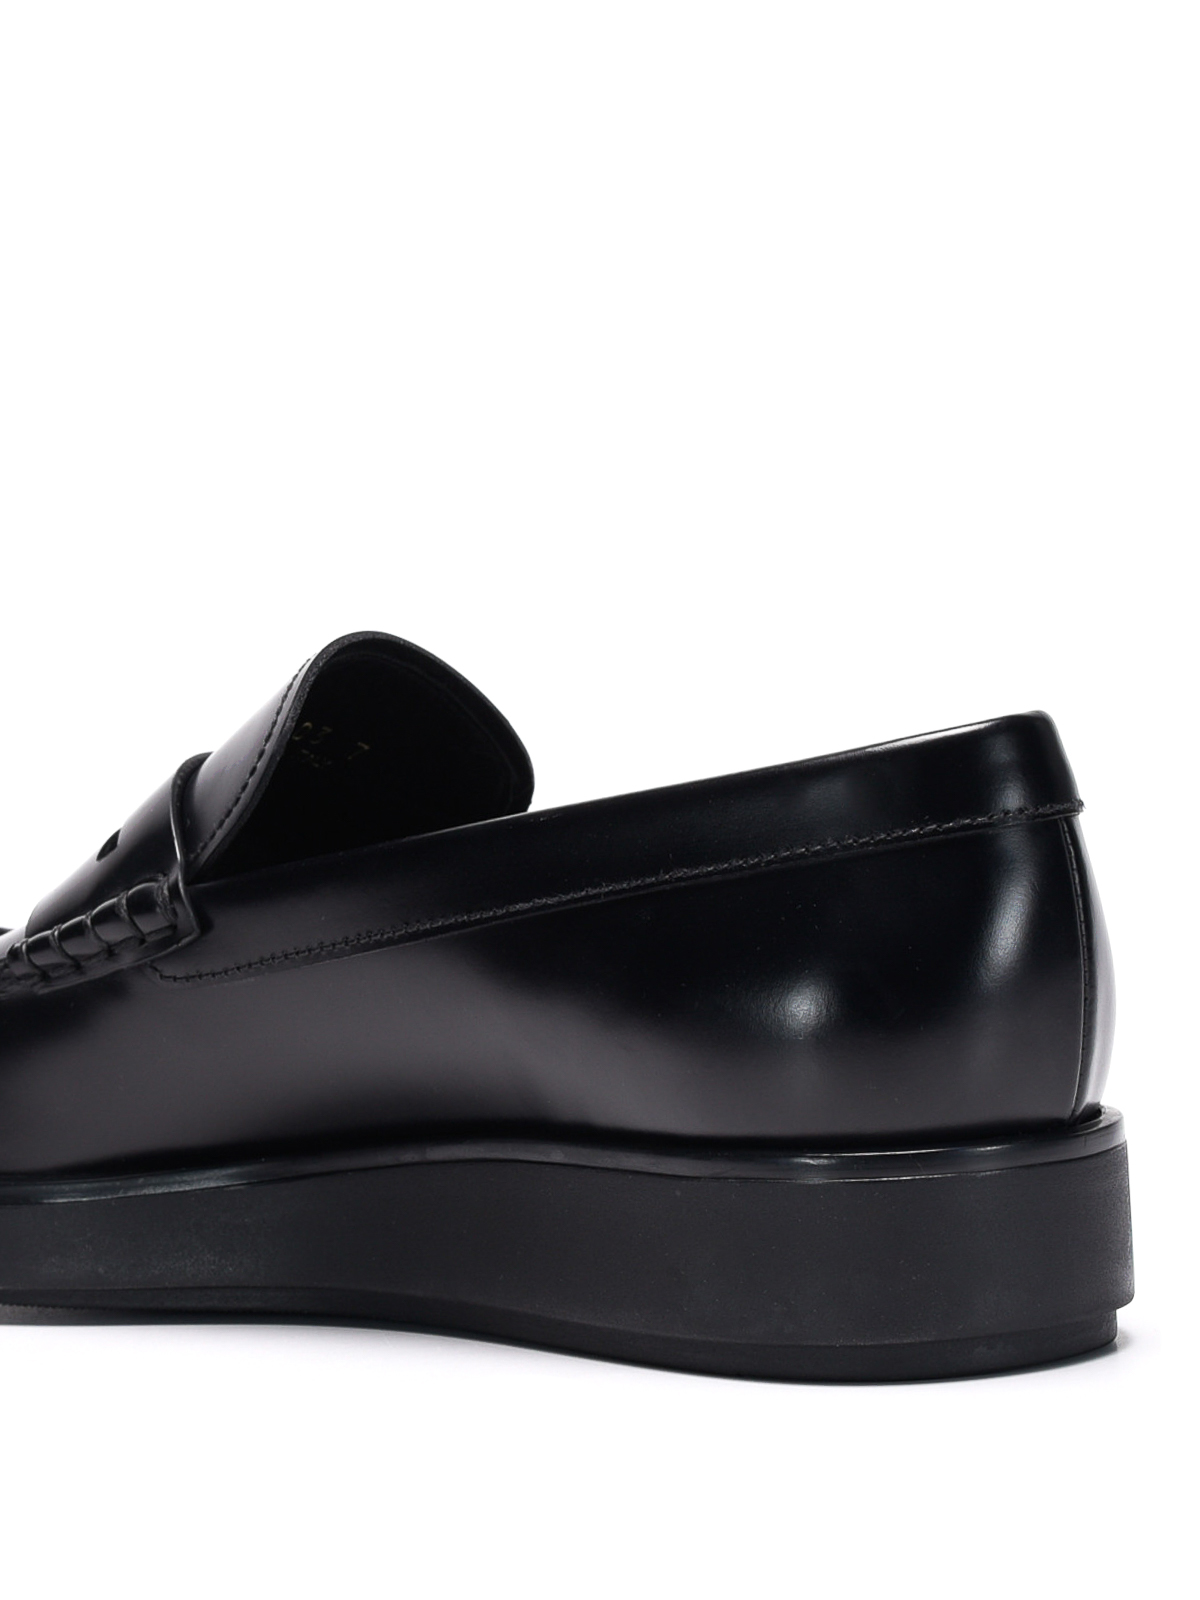 Loafers & Slippers Prada - Brushed leather loafers - 2DE103B4LF0002